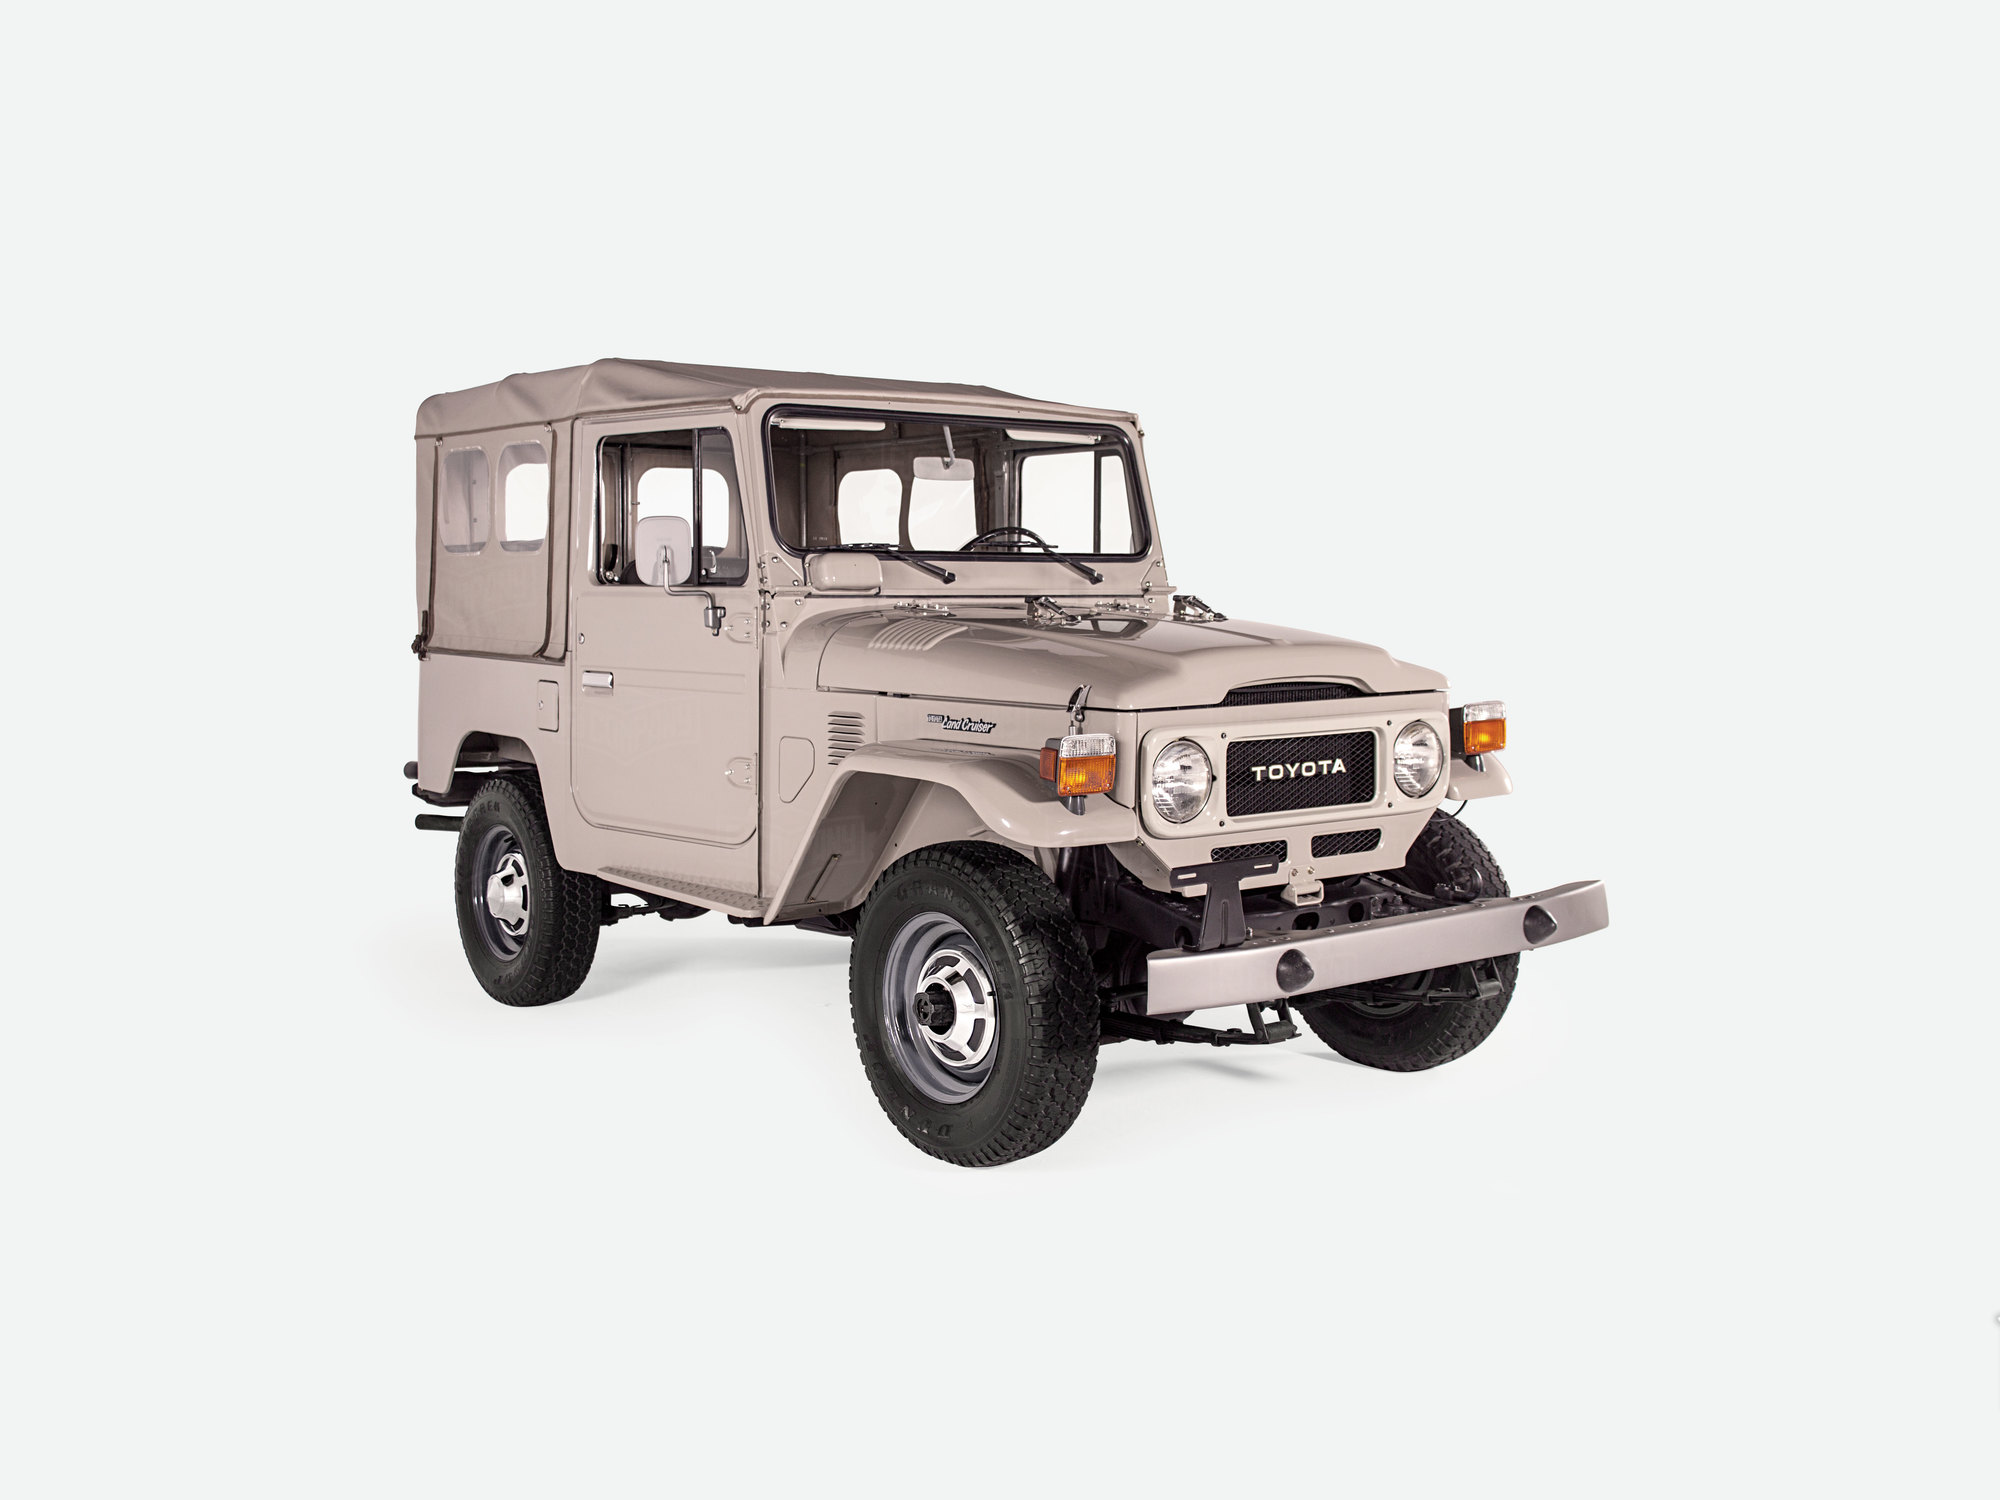 This Toyota Land Cruiser will take its new owner from the highest mountaintop to the nearest cafe like no other vehicle can.